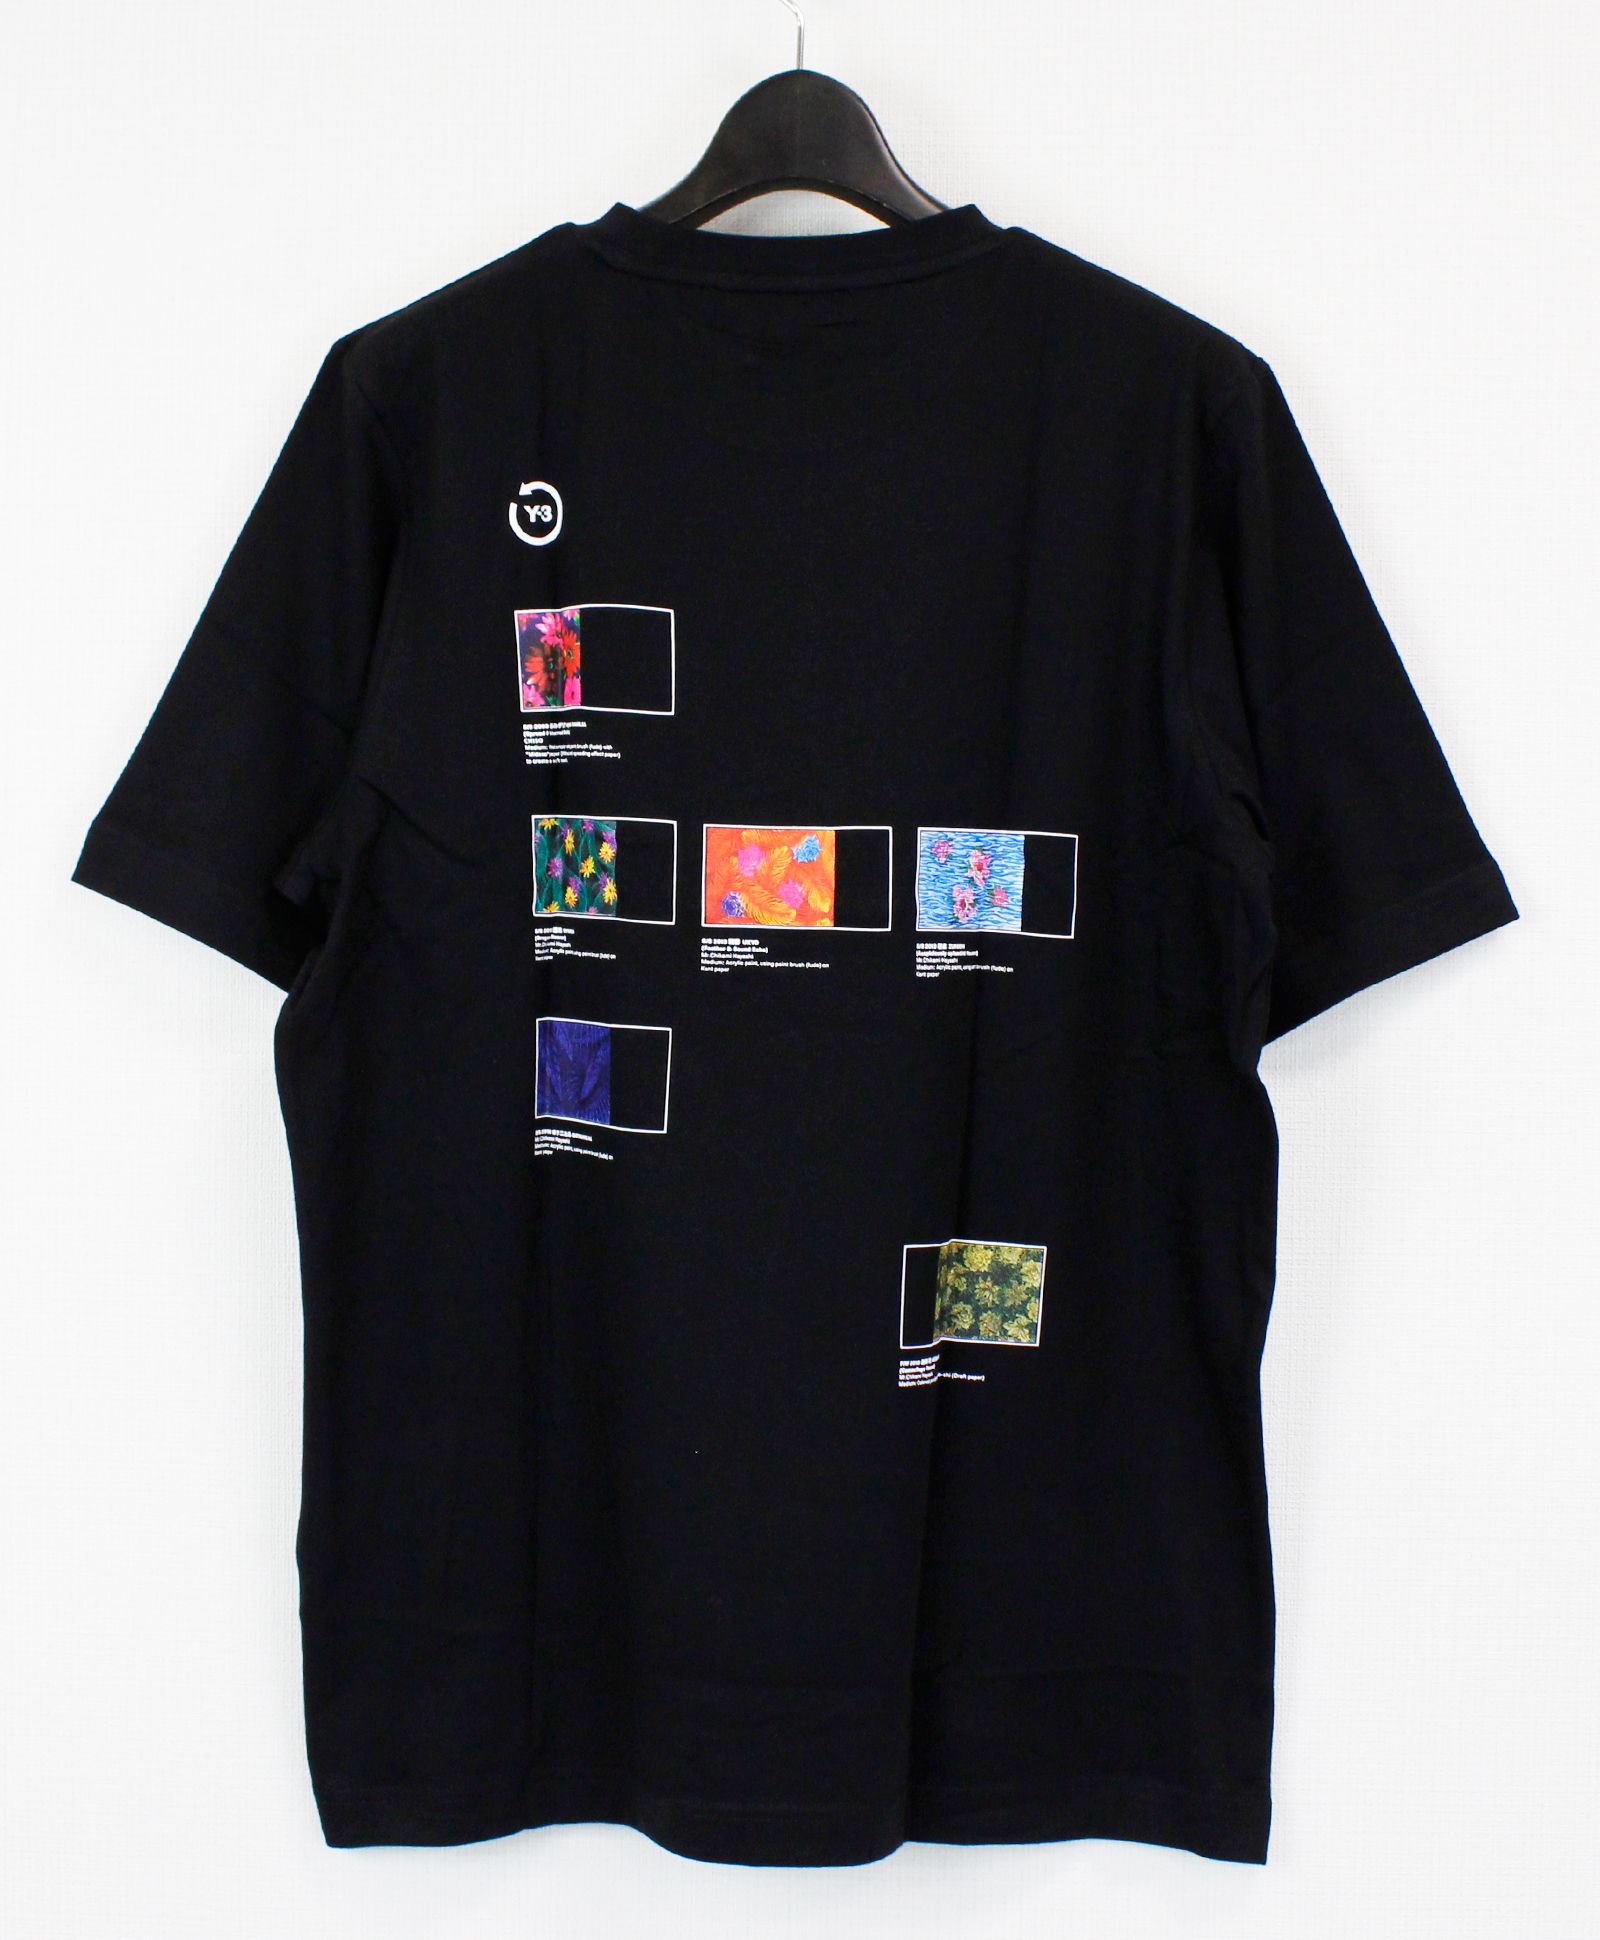 S/S バックプリントTシャツ U CH2 INDEX SS TEE [HG8802-APPS22] BLACK - S